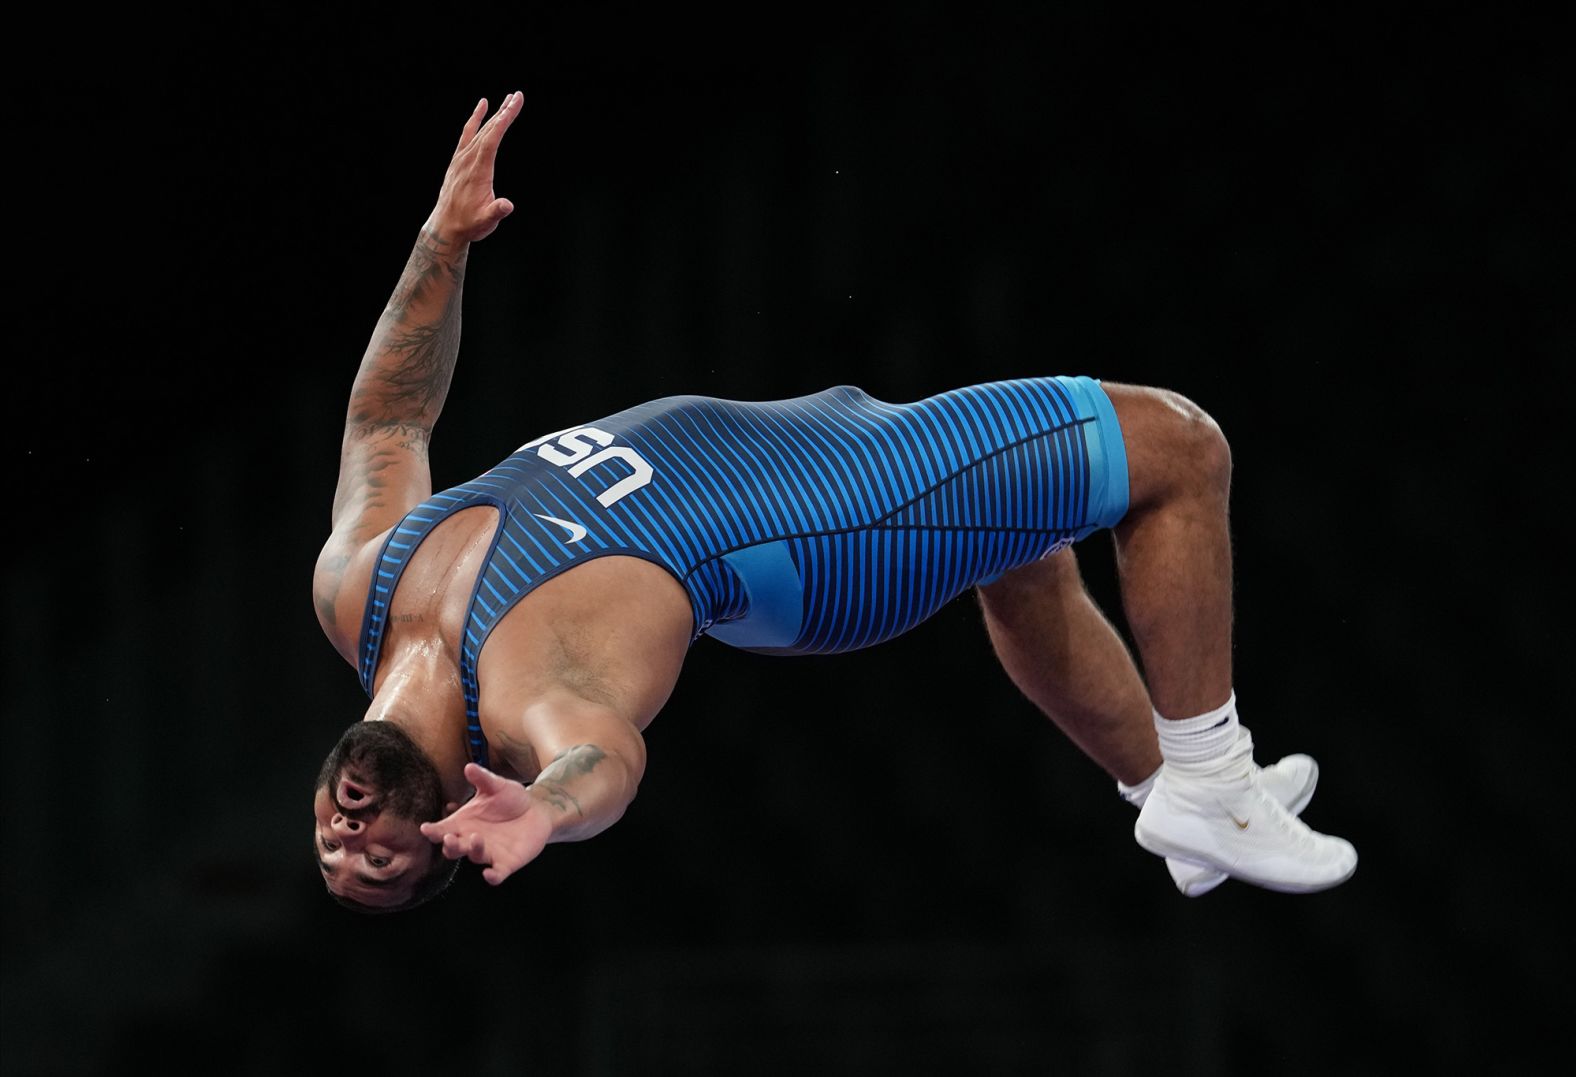 American wrestler Gable Steveson celebrates after a <a href="index.php?page=&url=https%3A%2F%2Fwww.cnn.com%2Fworld%2Flive-news%2Ftokyo-2020-olympics-08-06-21-spt%2Fh_fa83b7c83d36fcfb8a0035d8791cc125" target="_blank">dramatic last-second comeback</a> earned him a gold medal on August 6. Steveson was named after legendary wrestler Dan Gable, who won gold at the Olympics in 1972.